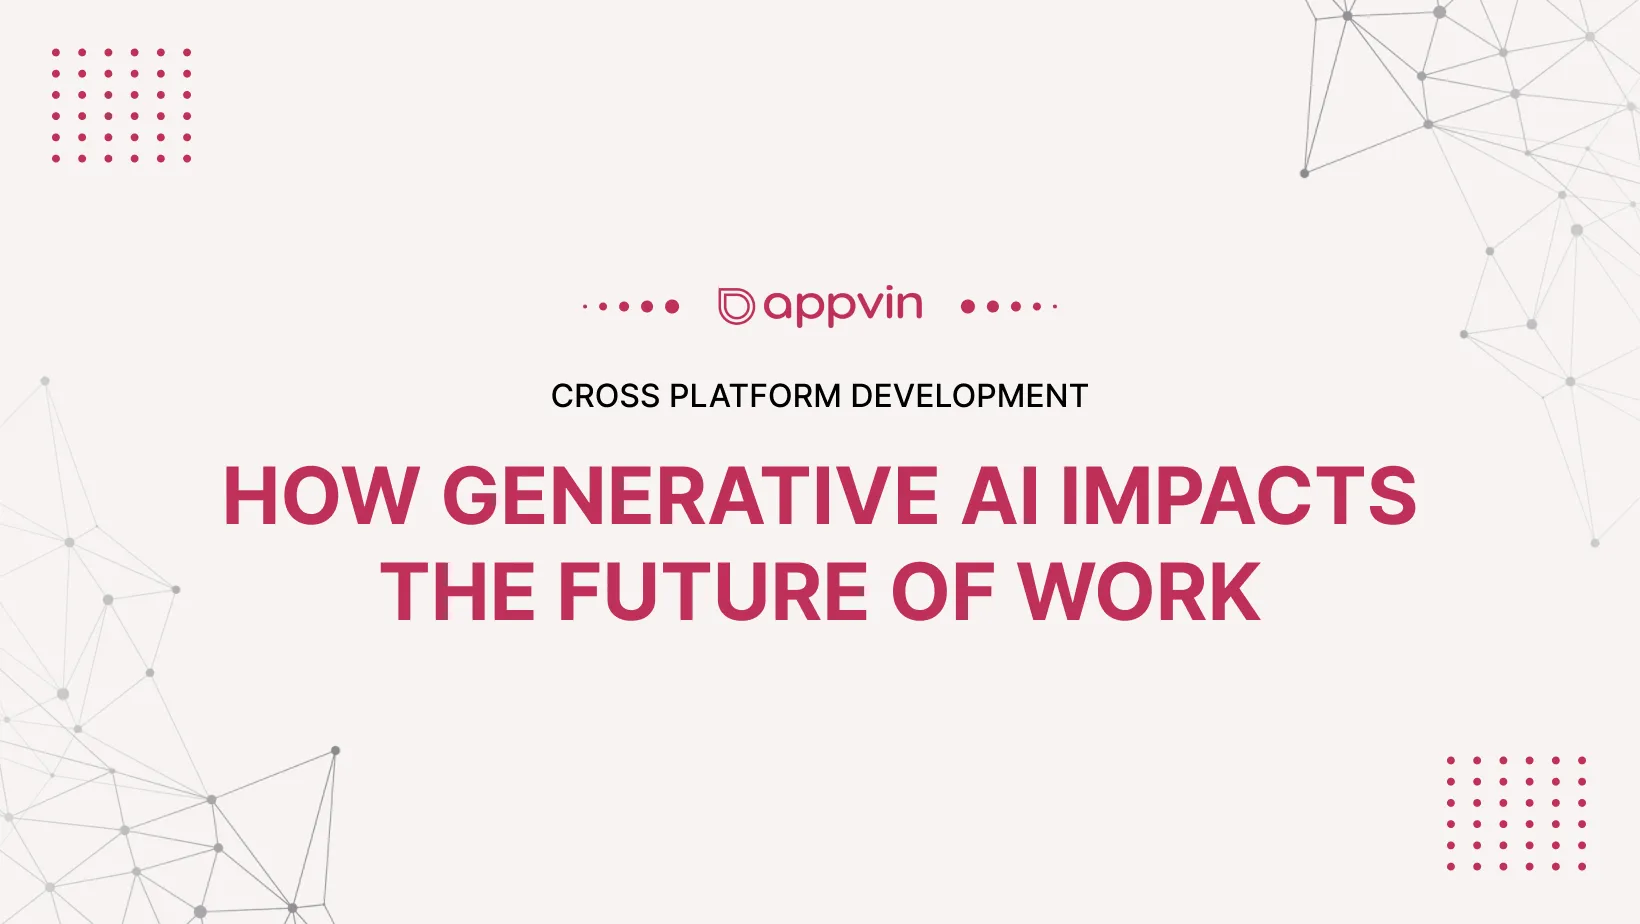 How Generative AI Impacts the Future of Work